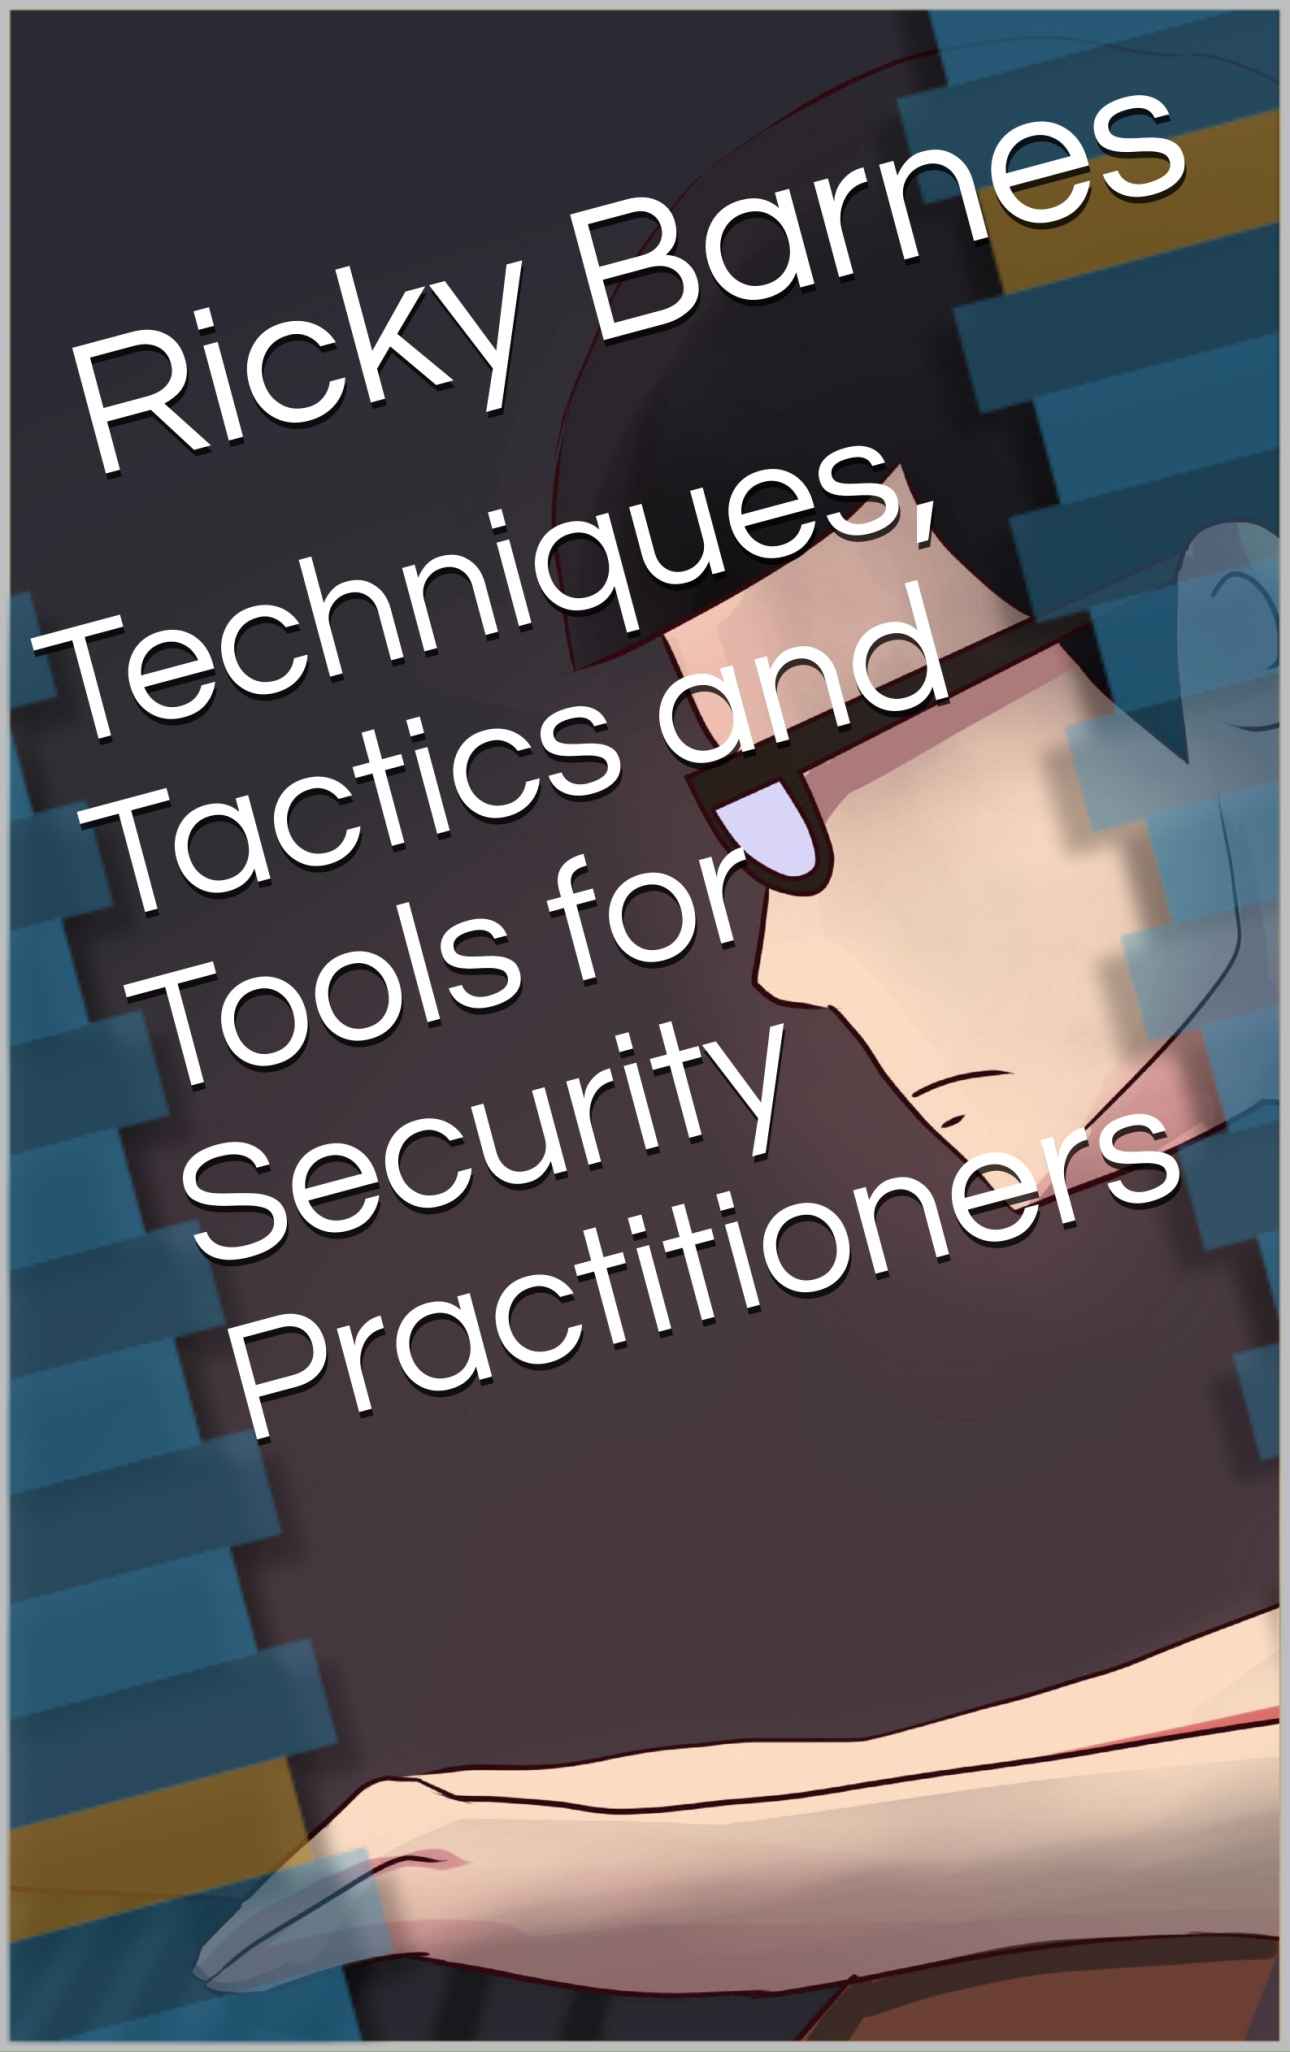 Techniques, Tactics and Tools for Security Practitioners.jpeg